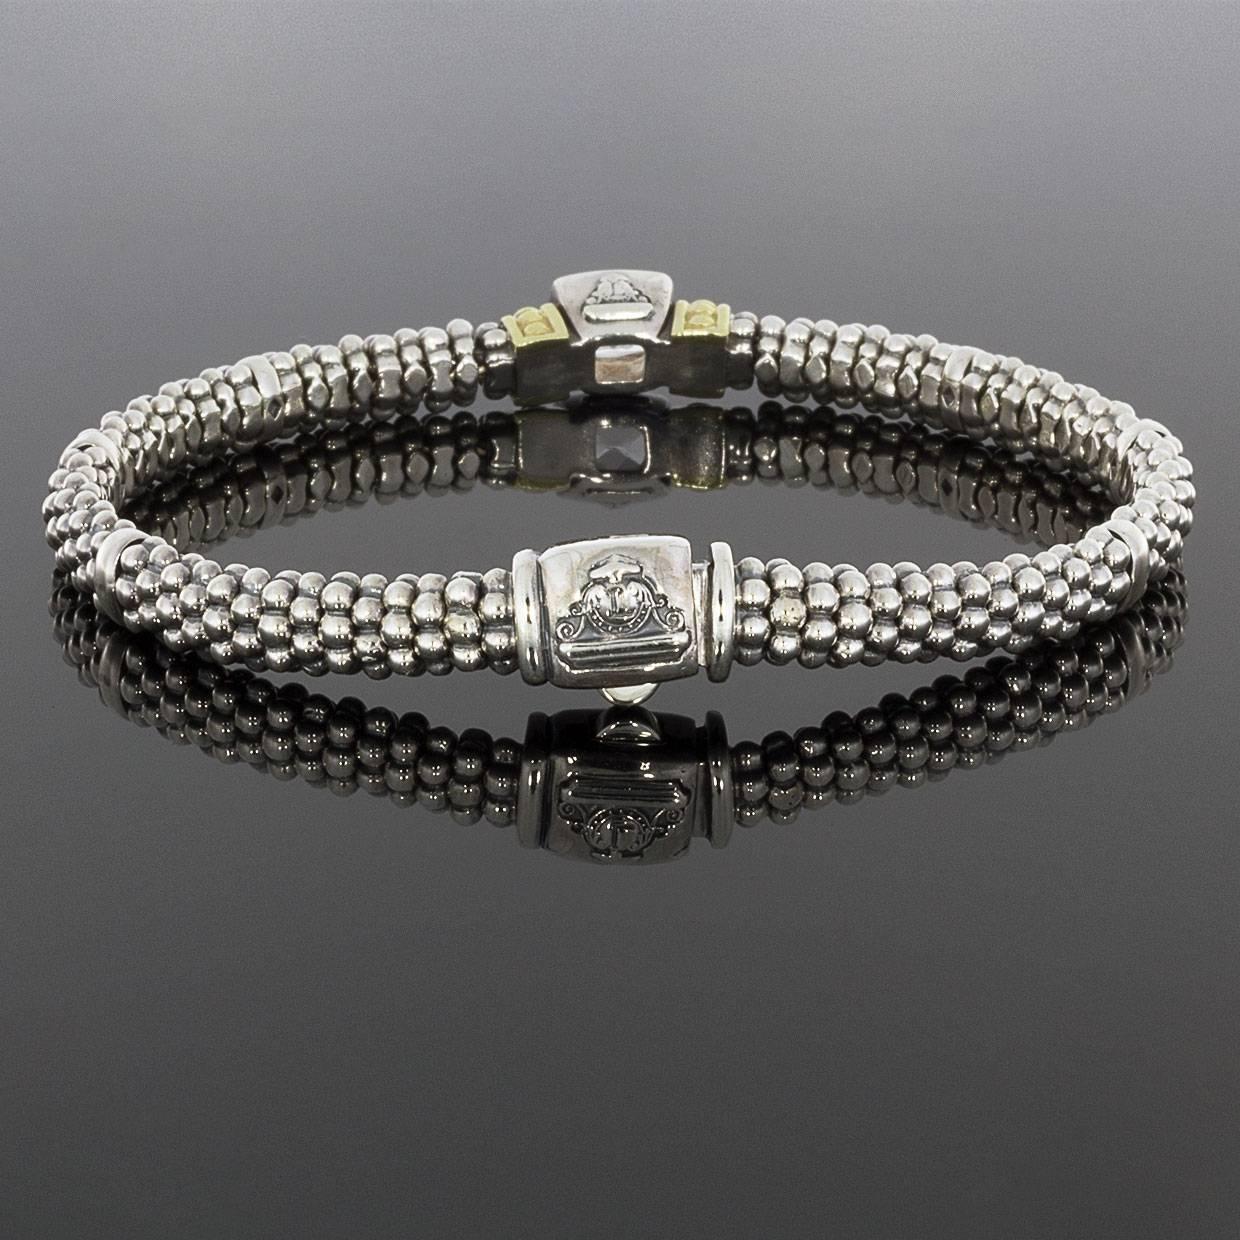 Cushion Cut Lagos White Topaz Glacier Now Caviar Sterling Silver and Gold Bracelet